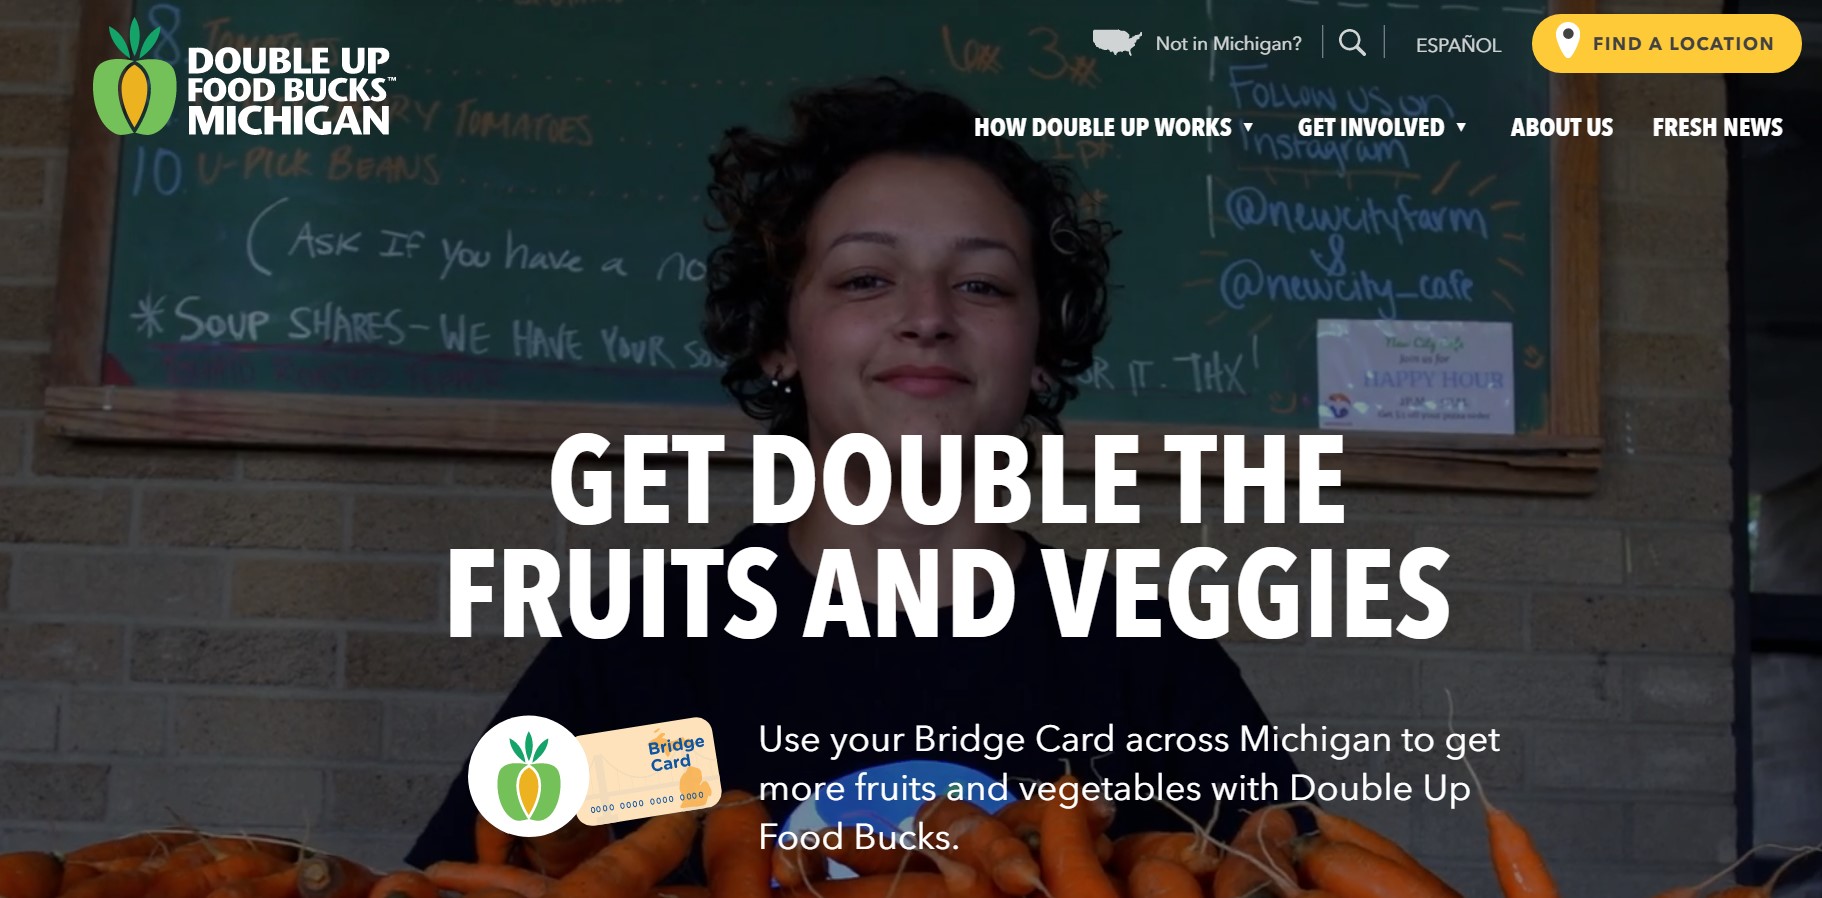 Double Up Food Bucks has one of our favorite nonprofit websites.